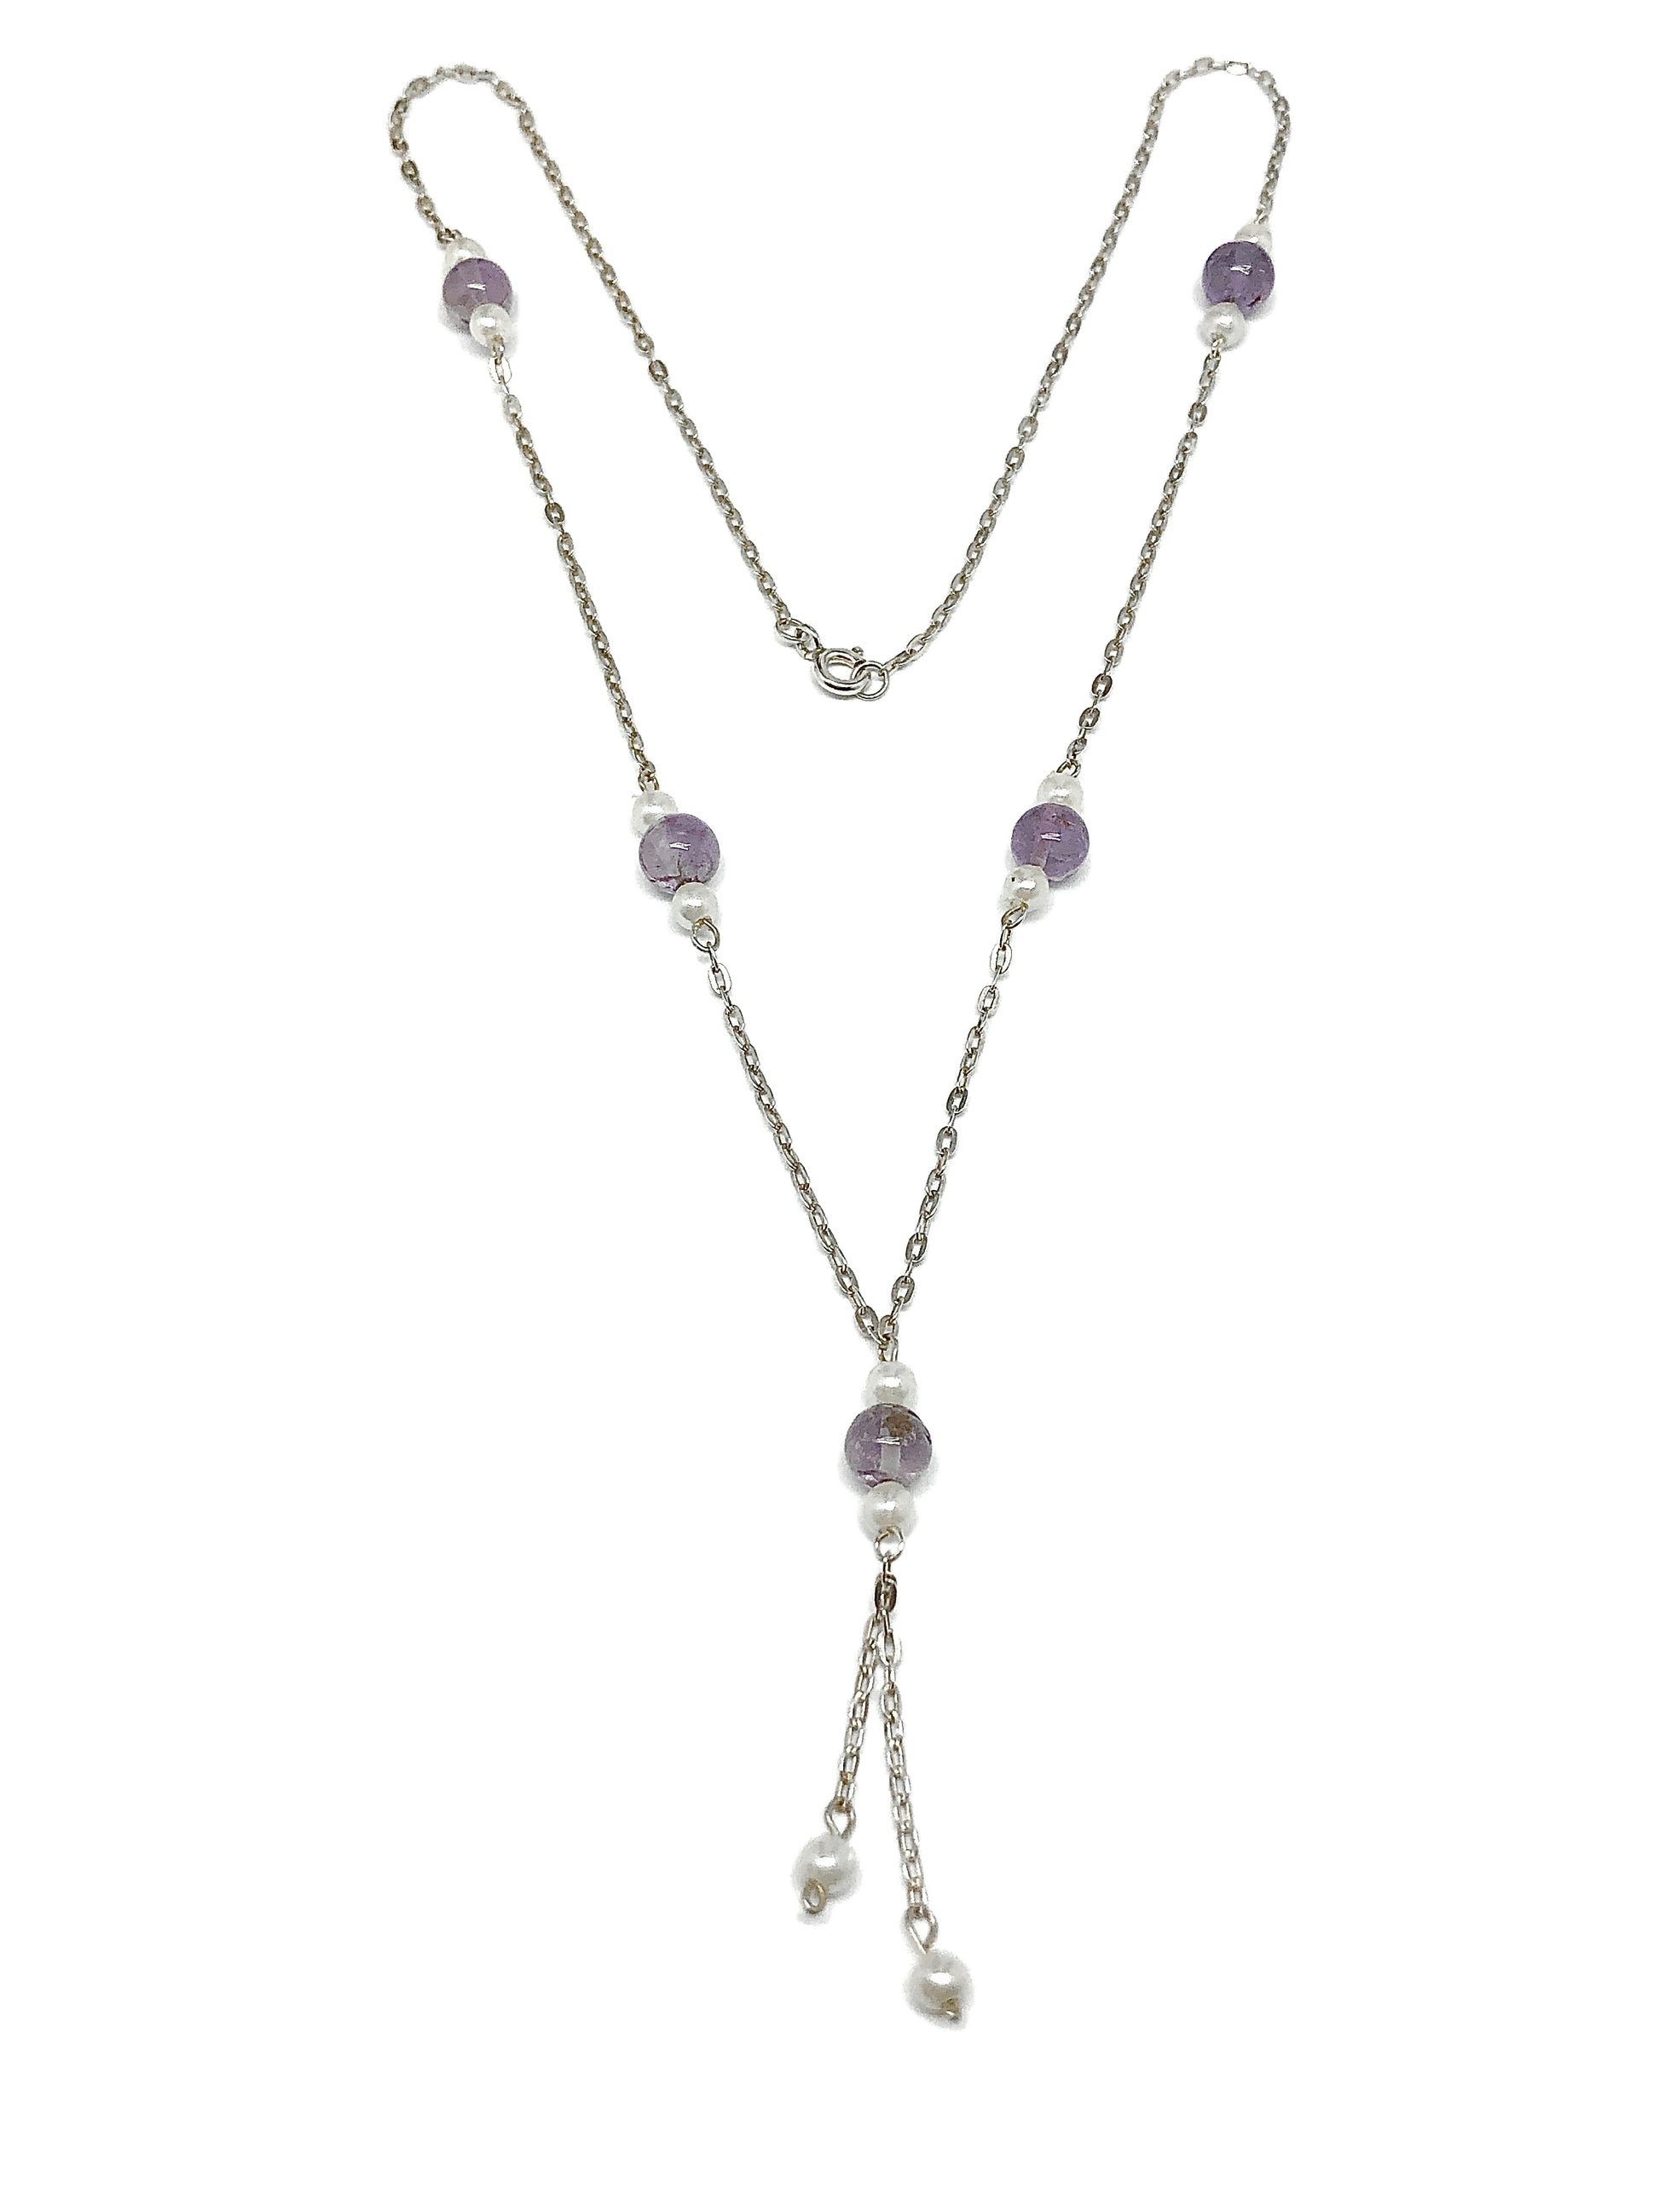 Jewelry Necklace - Purple Amethyst Sterling Silver Layering Y Chain Station Necklace